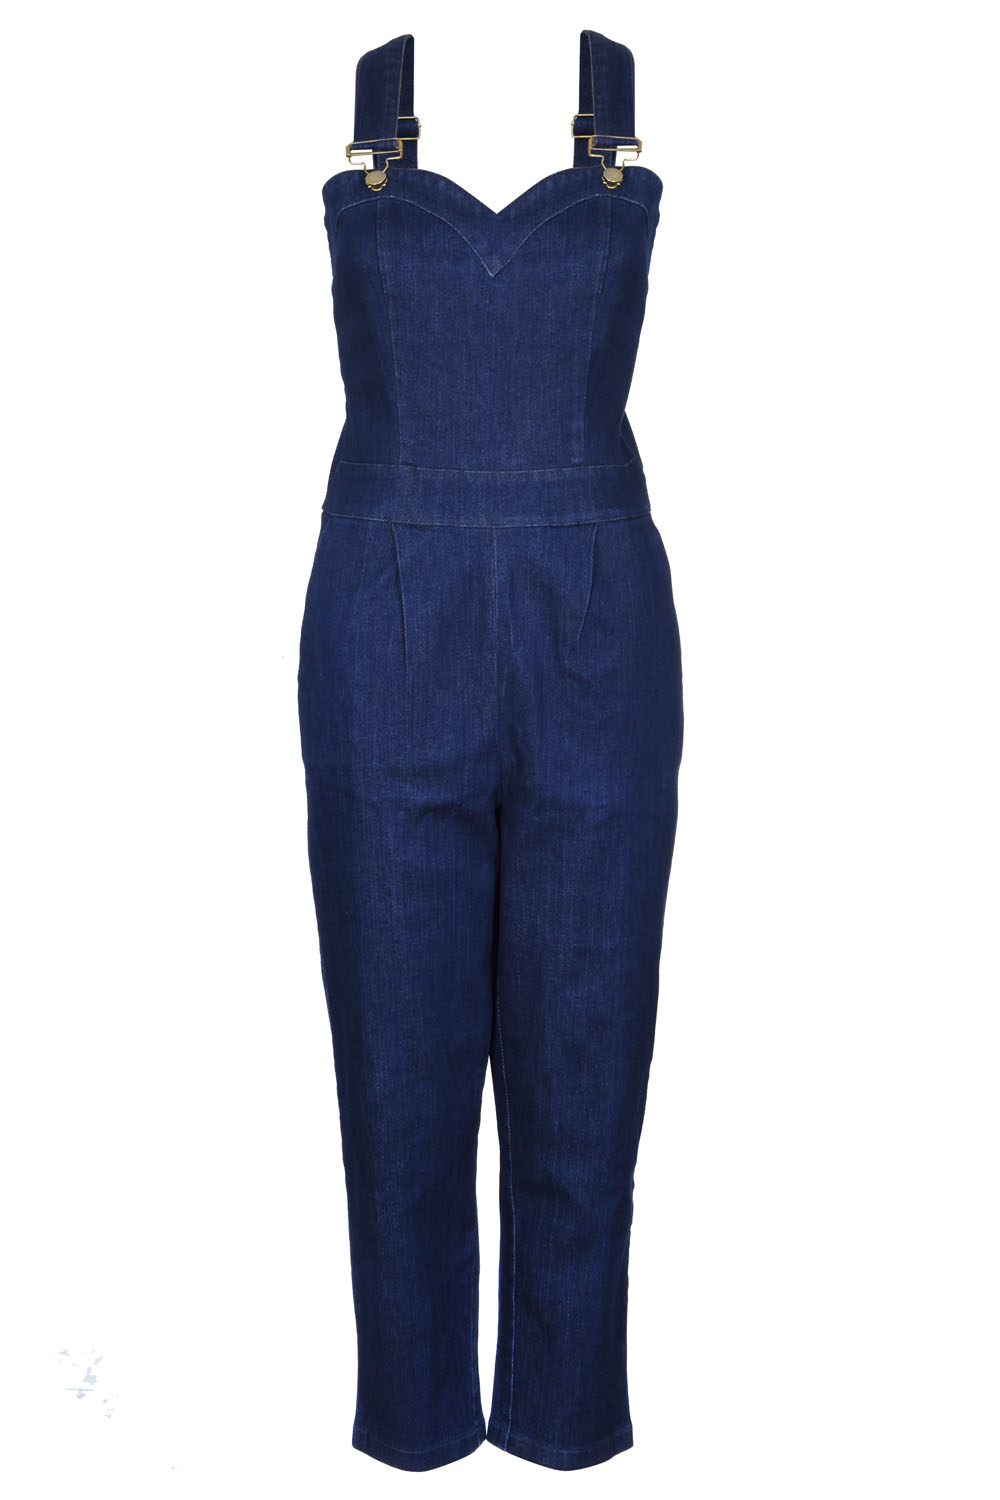 Curve Connie Fitted Capri Overalls Denim | Vintage Inspired Fashion ...